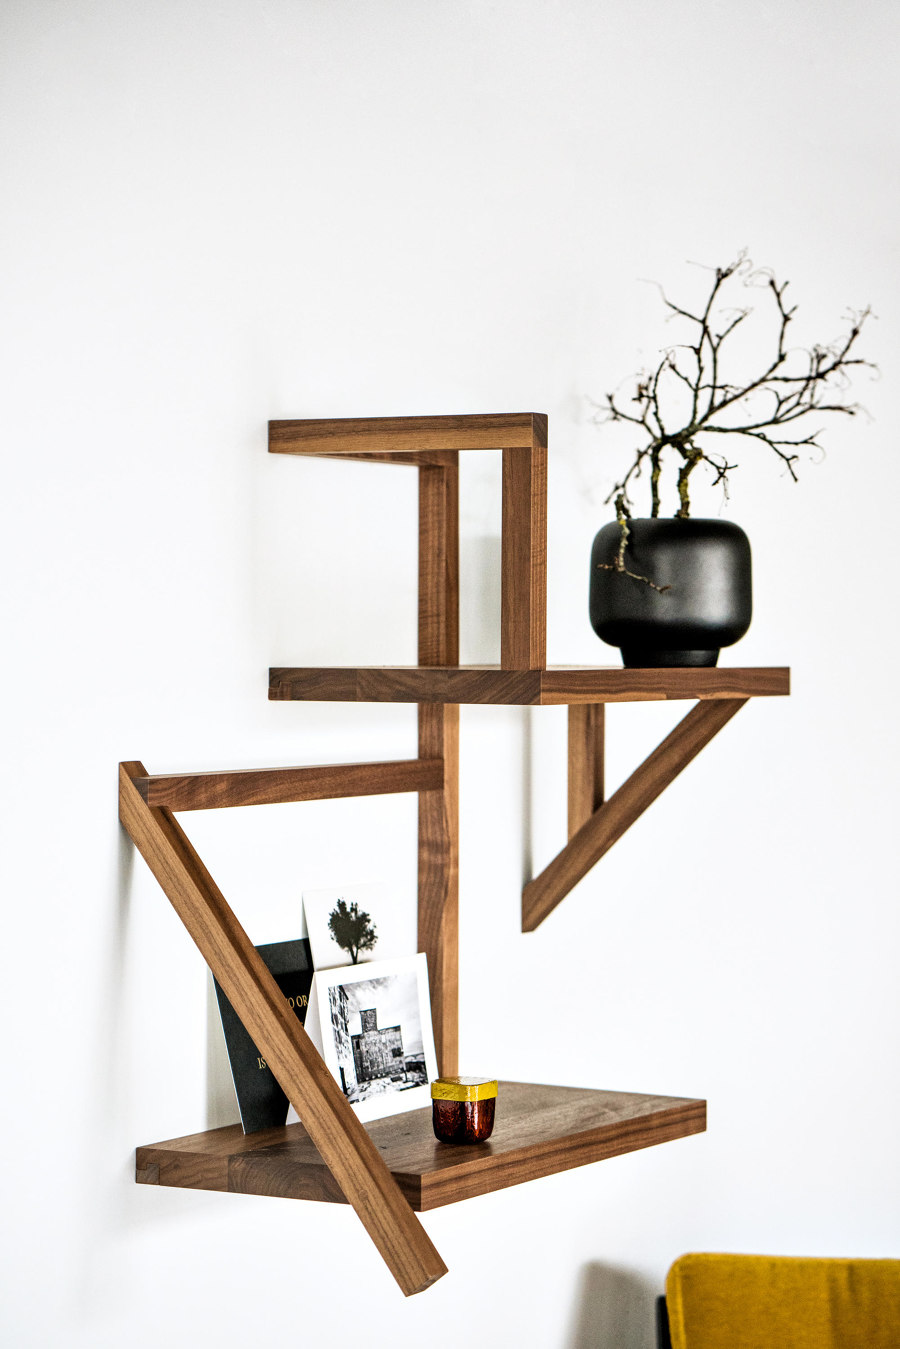 Working with wood – ten examples of solid wood furniture | Nouveautés